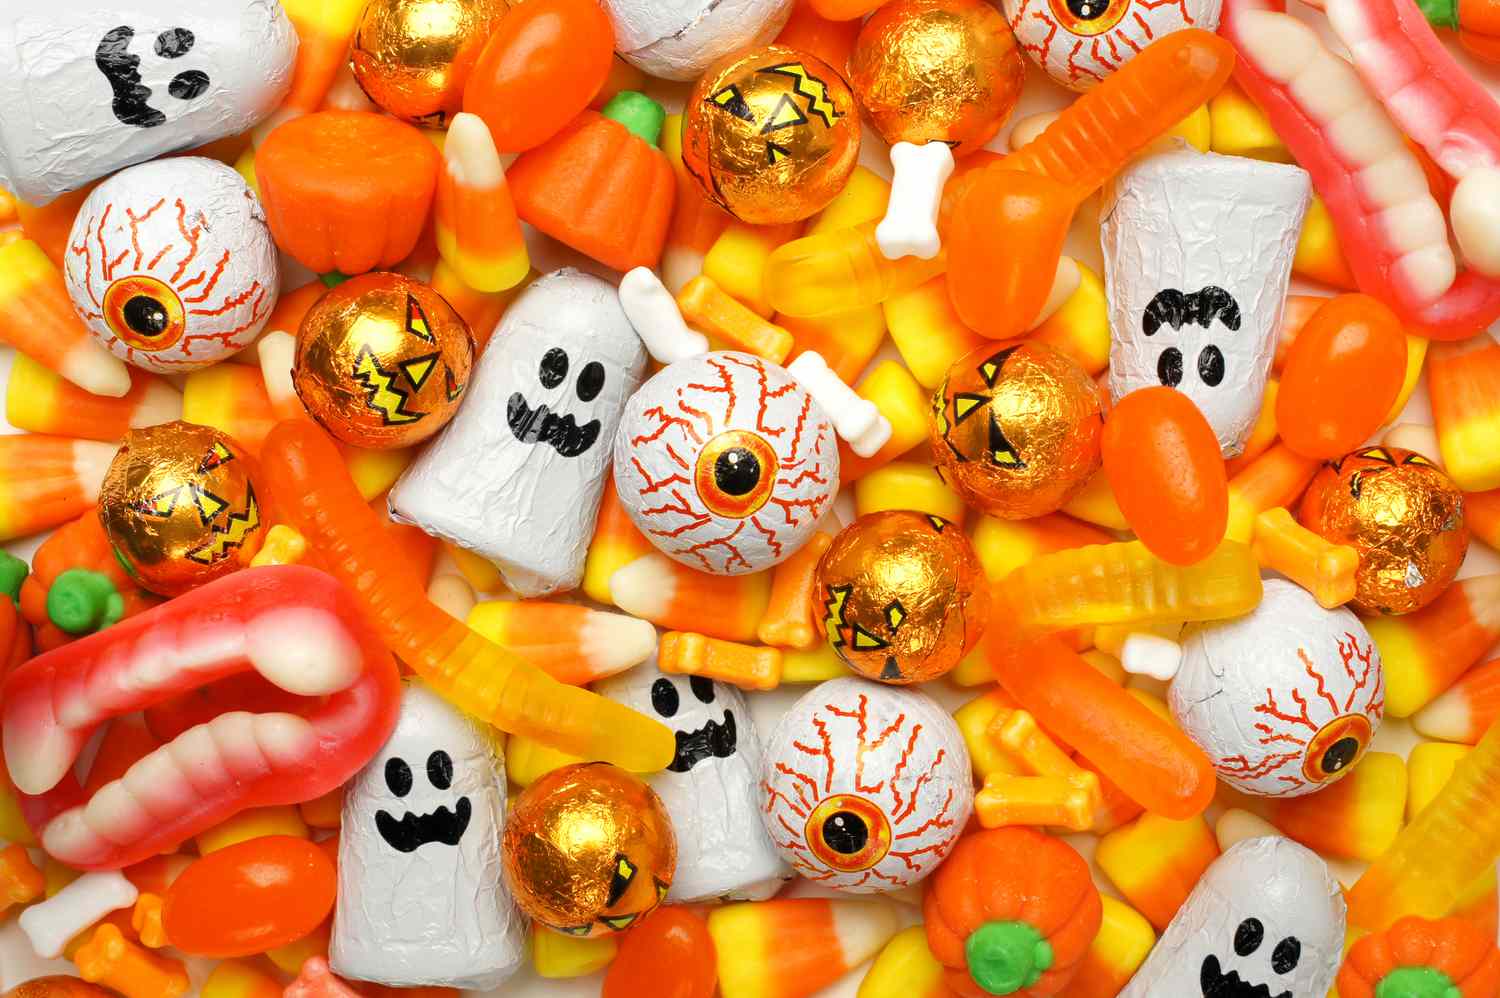 Use Up Your Leftover Halloween Candy in These Sweet and Spooky Recipes | Martha Stewart